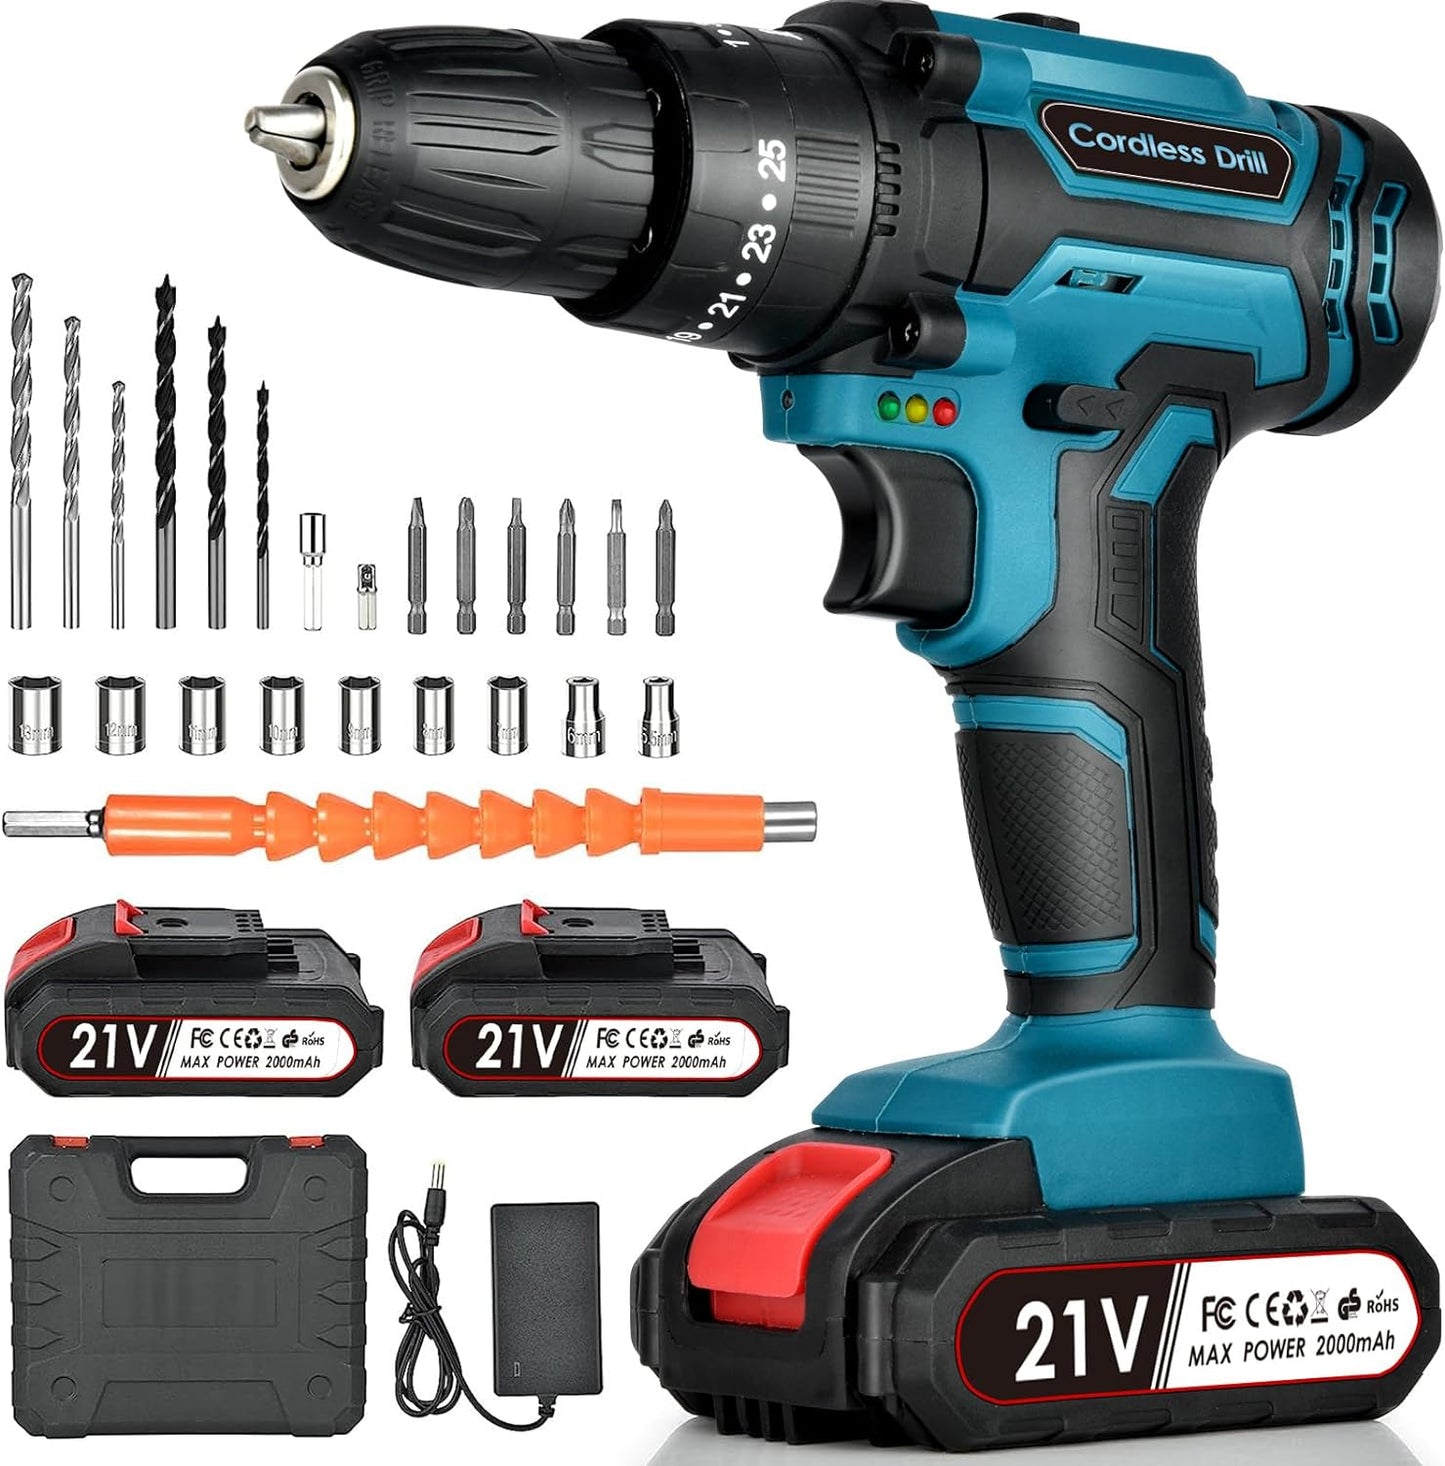 21V Cordless Drill Set: Electric Power Drill with Battery and Charger